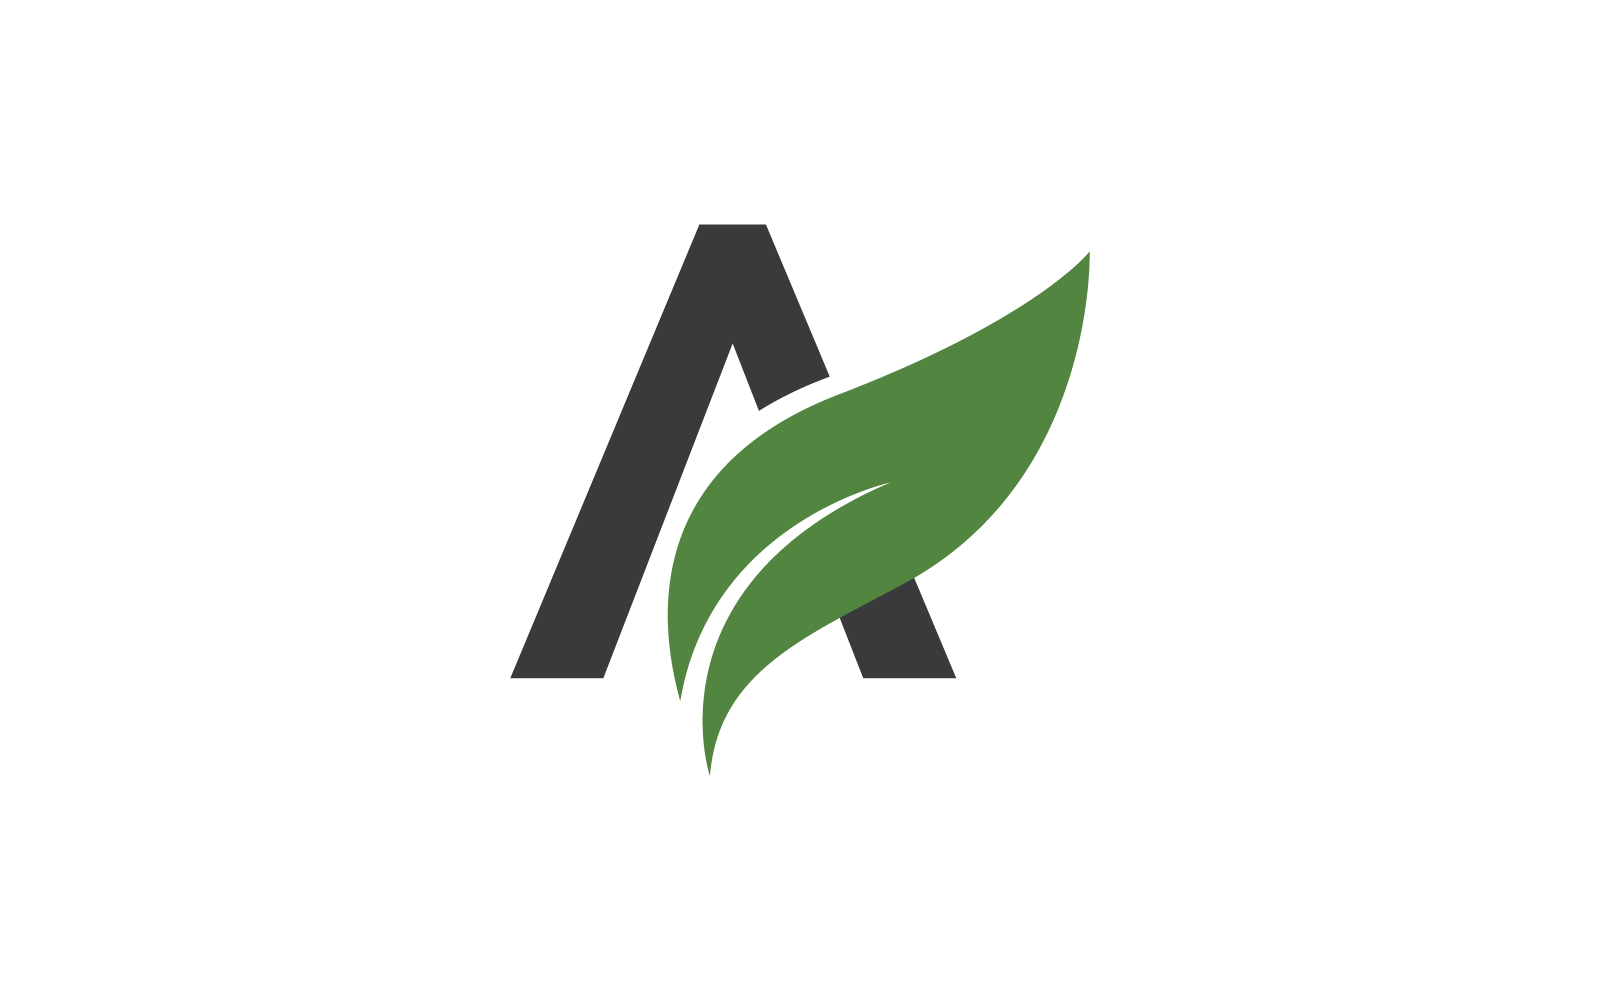 A Initial letter with green leaf logo vector fllat design